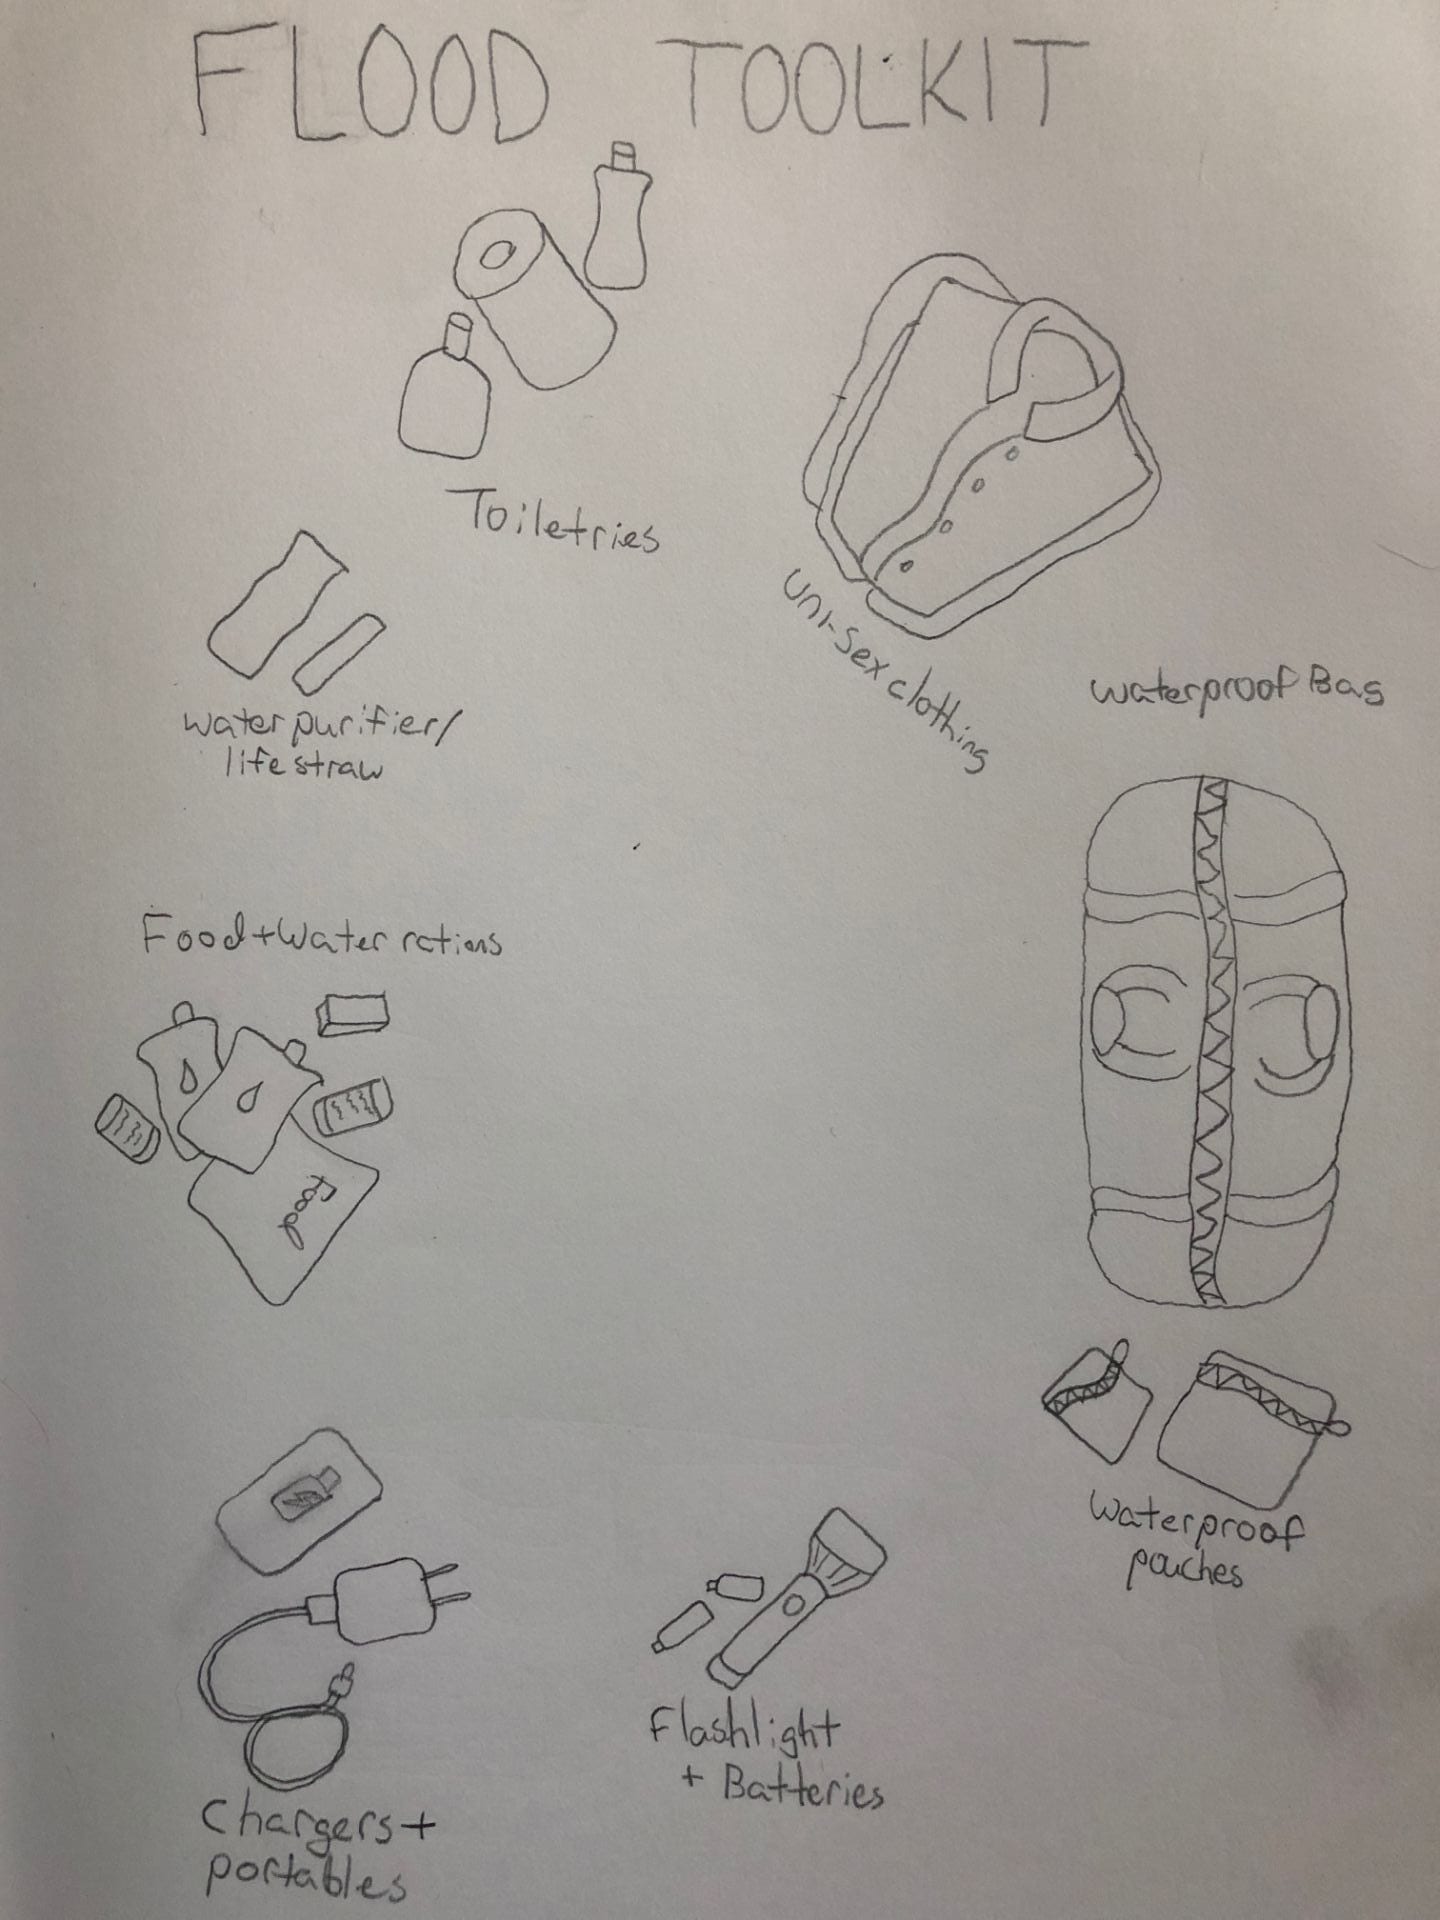 Flood Toolkit Sketch and Proposal